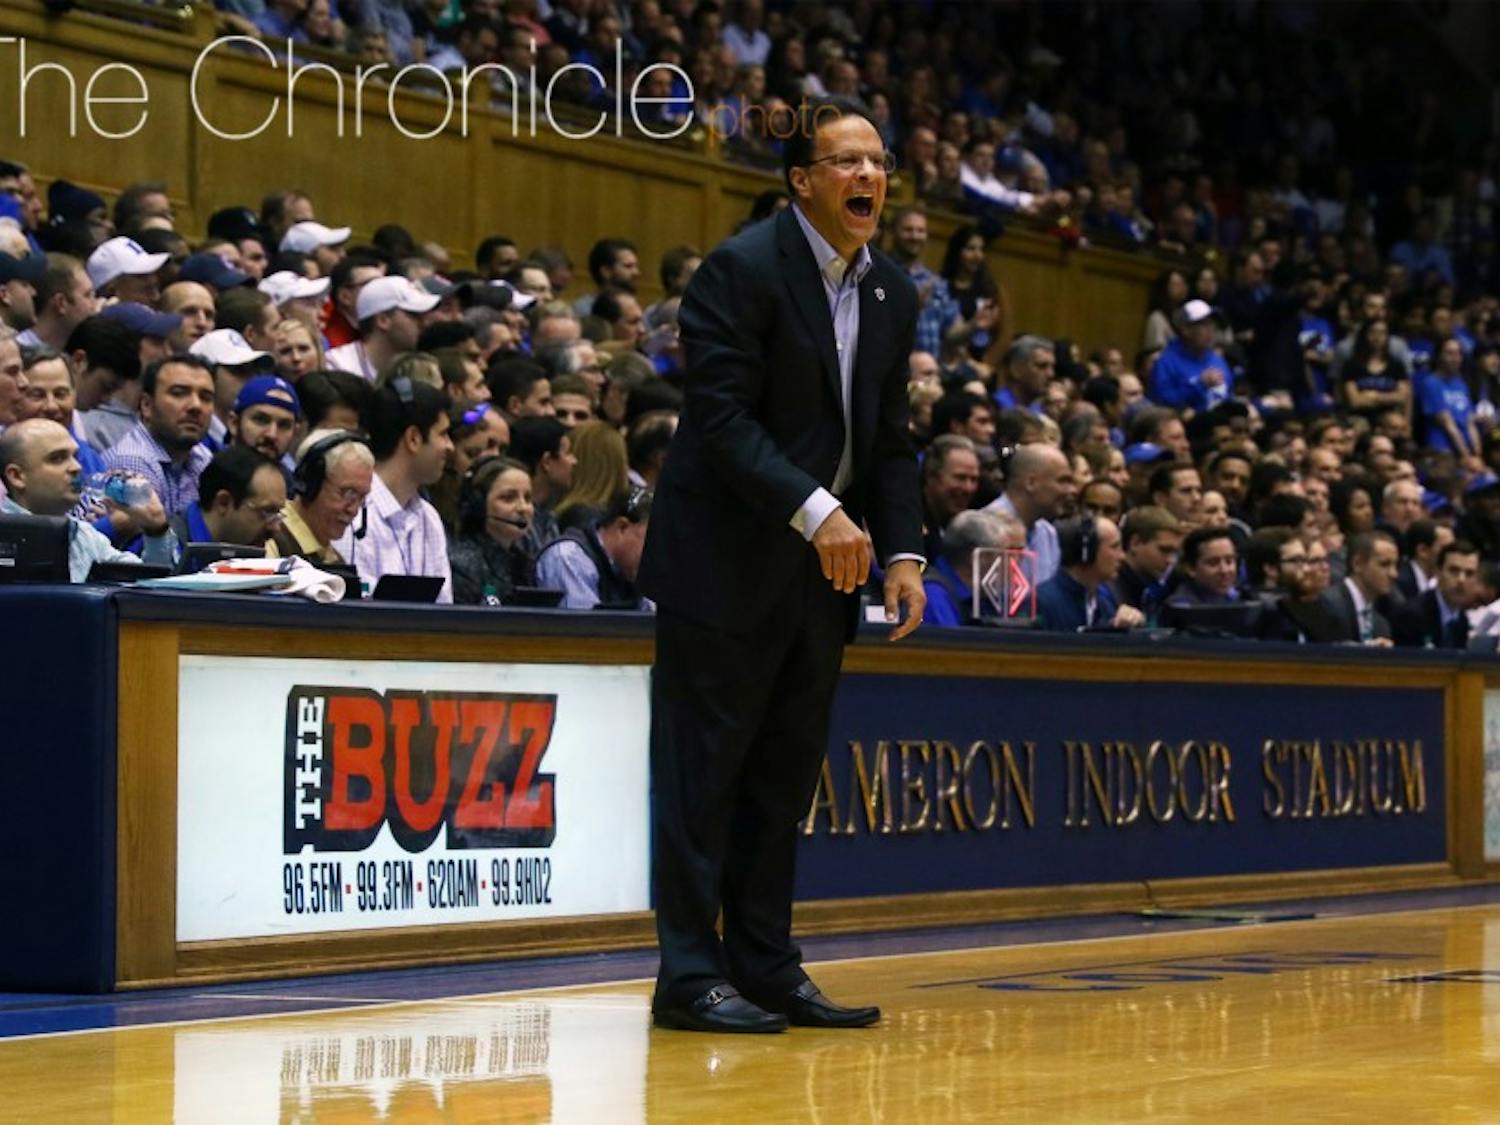 Indiana recently fired head coach Tom Crean, who had several obstacles to deal with during his tenure in Bloomington.&nbsp;